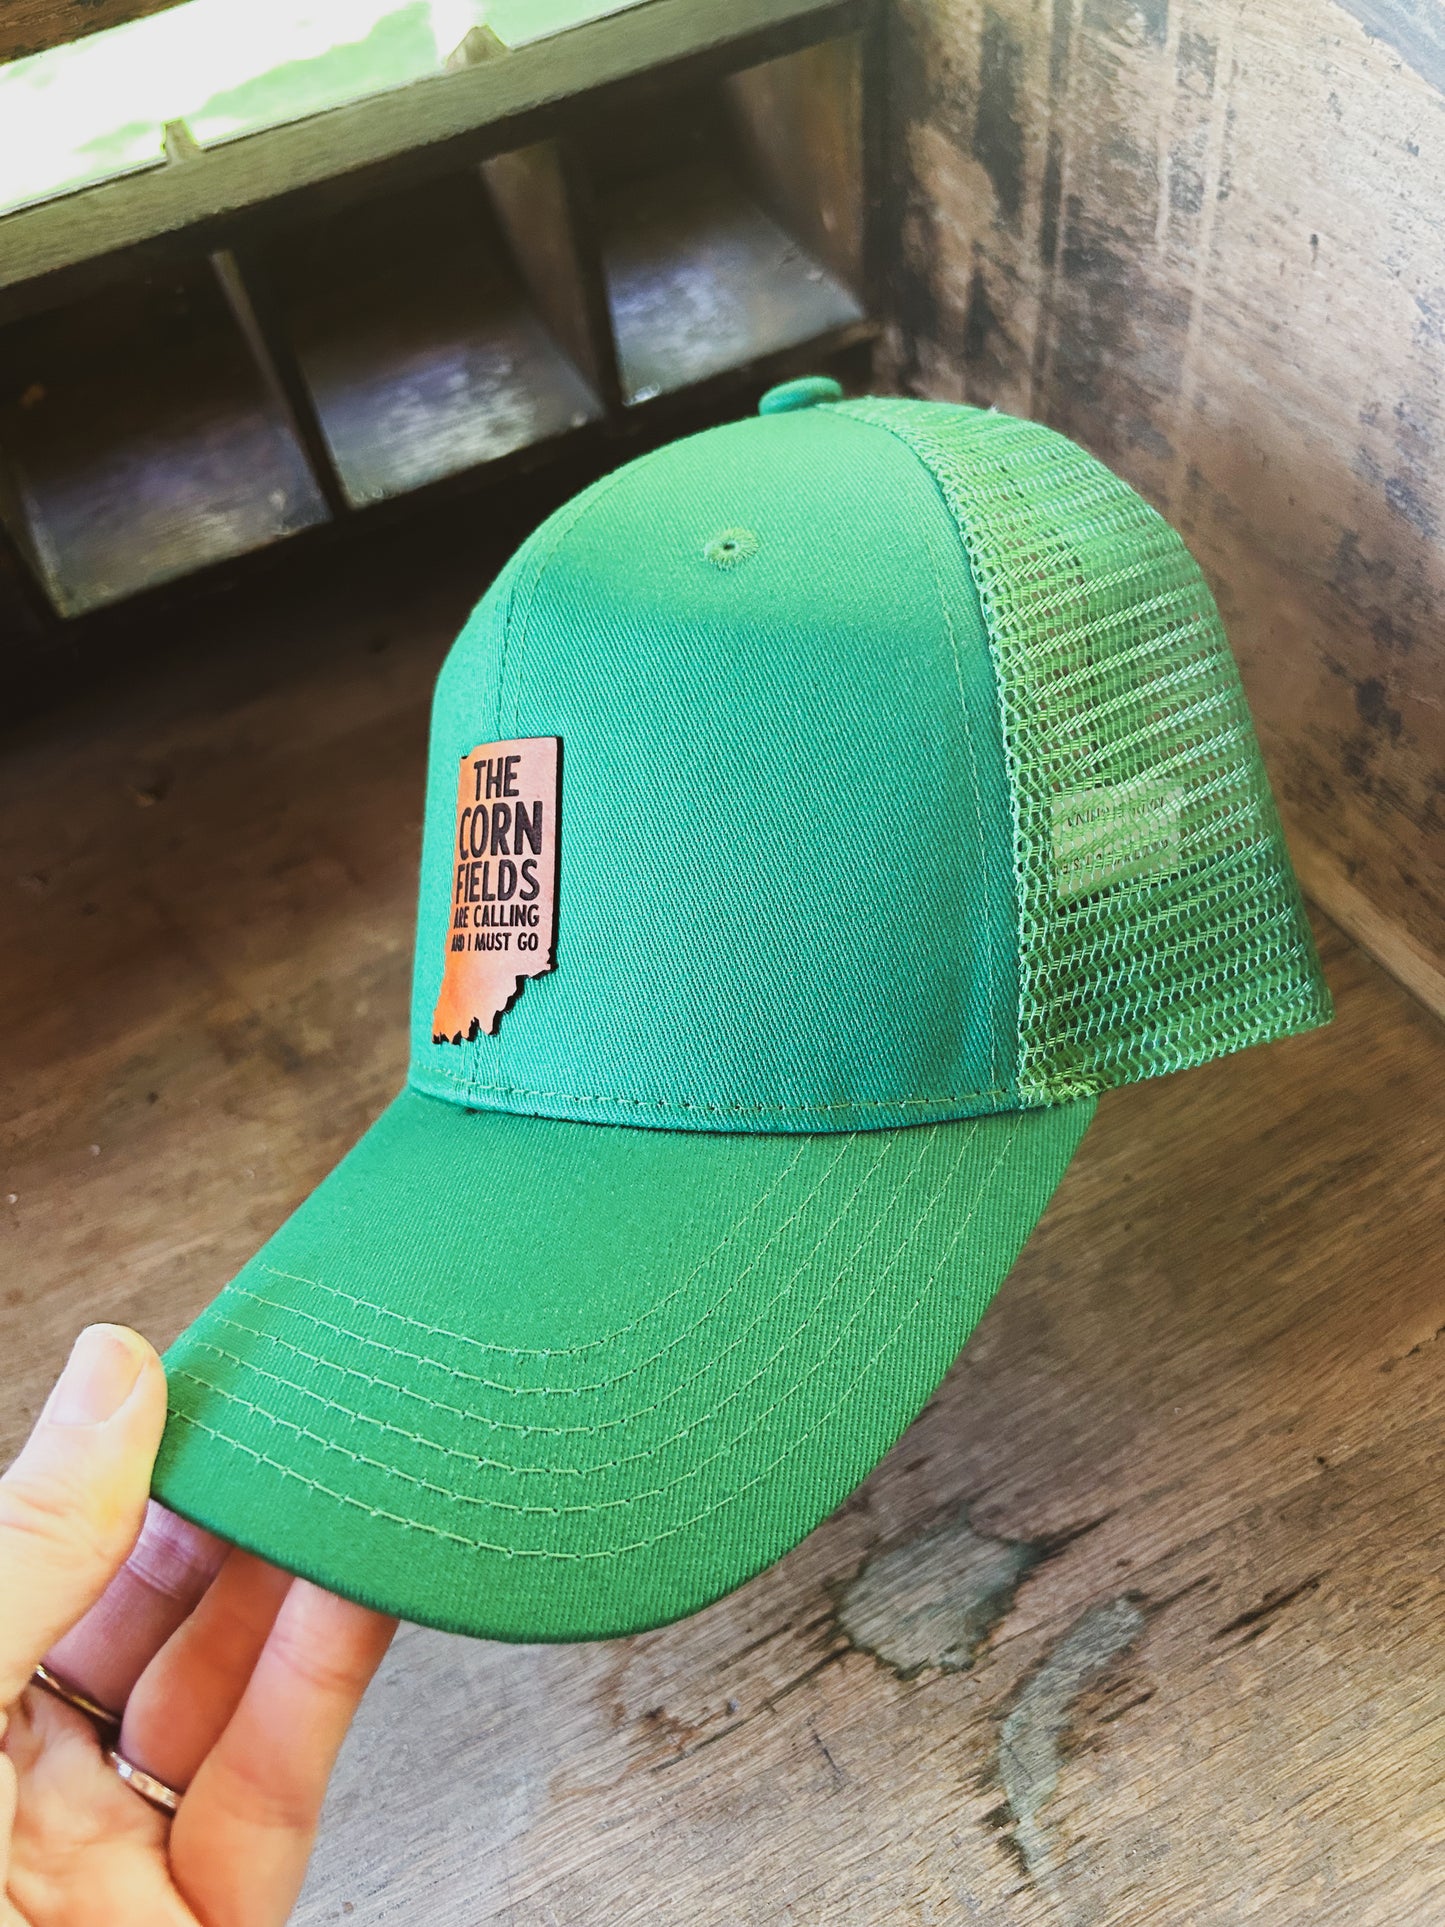 Indiana - The Cornfields Are Calling - Leather Patch Hat